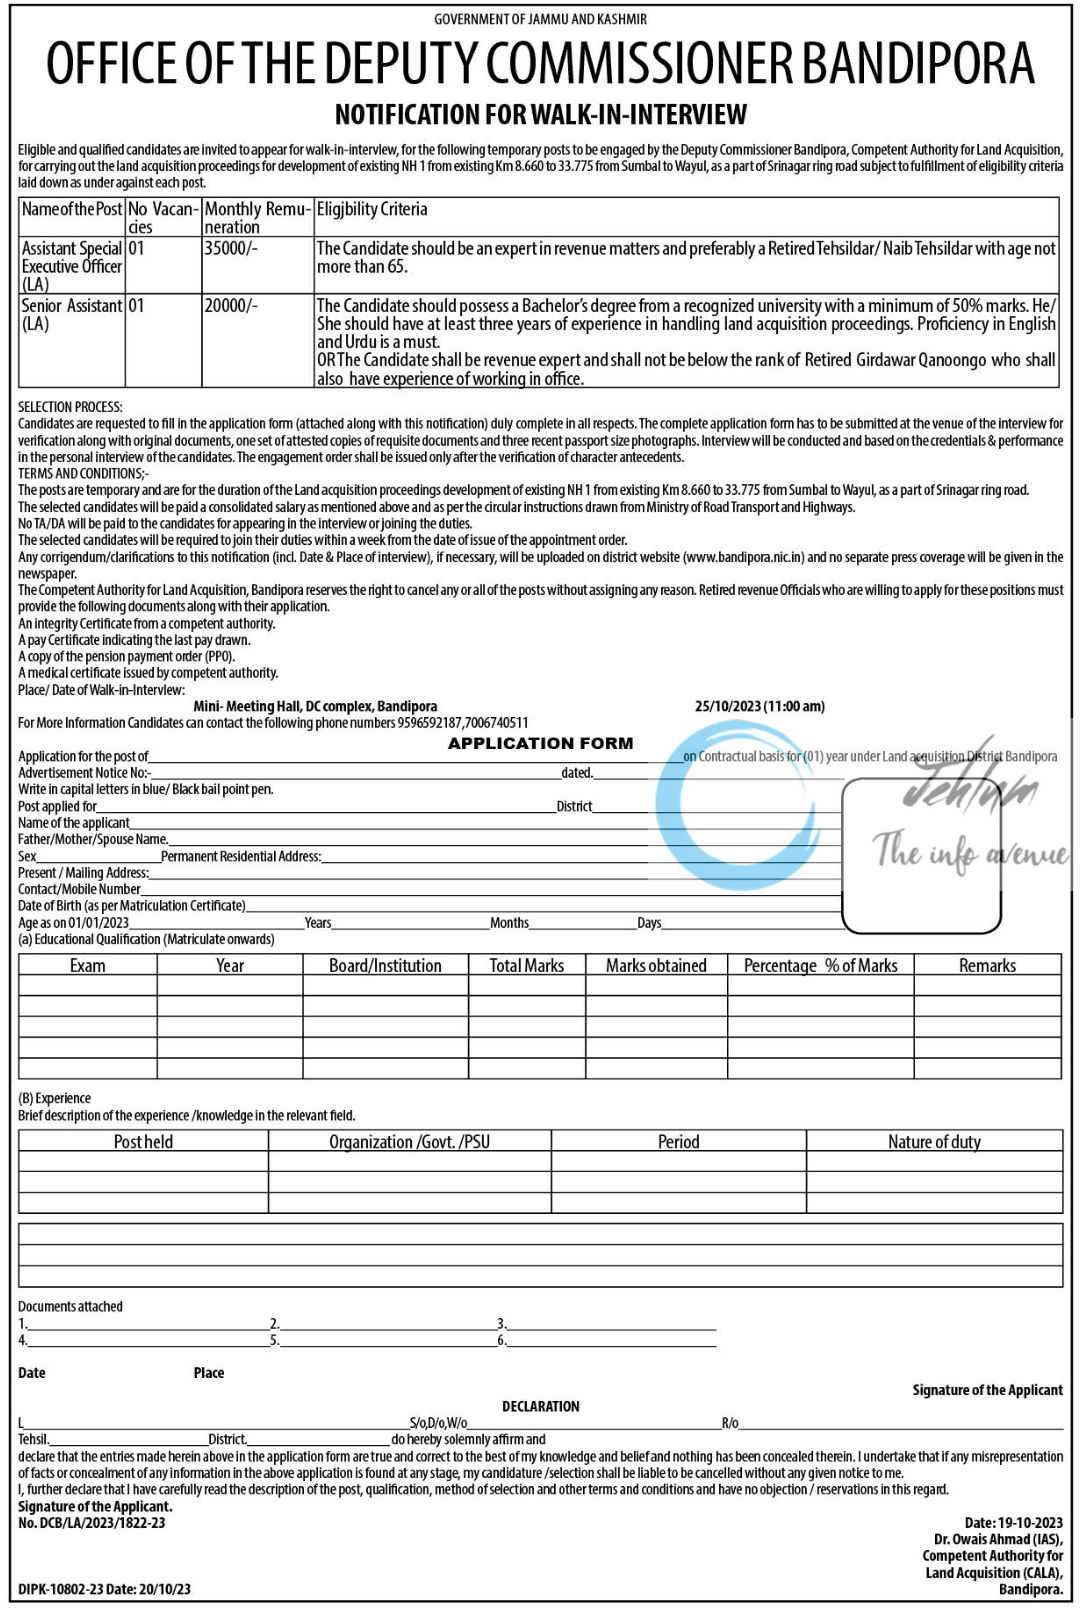 OFFICE OF THE DEPUTY COMMISSIONER BANDIPORA ADVERTISEMENT NOTIFICATION FOR WALK-IN-INTERVIEW 2023